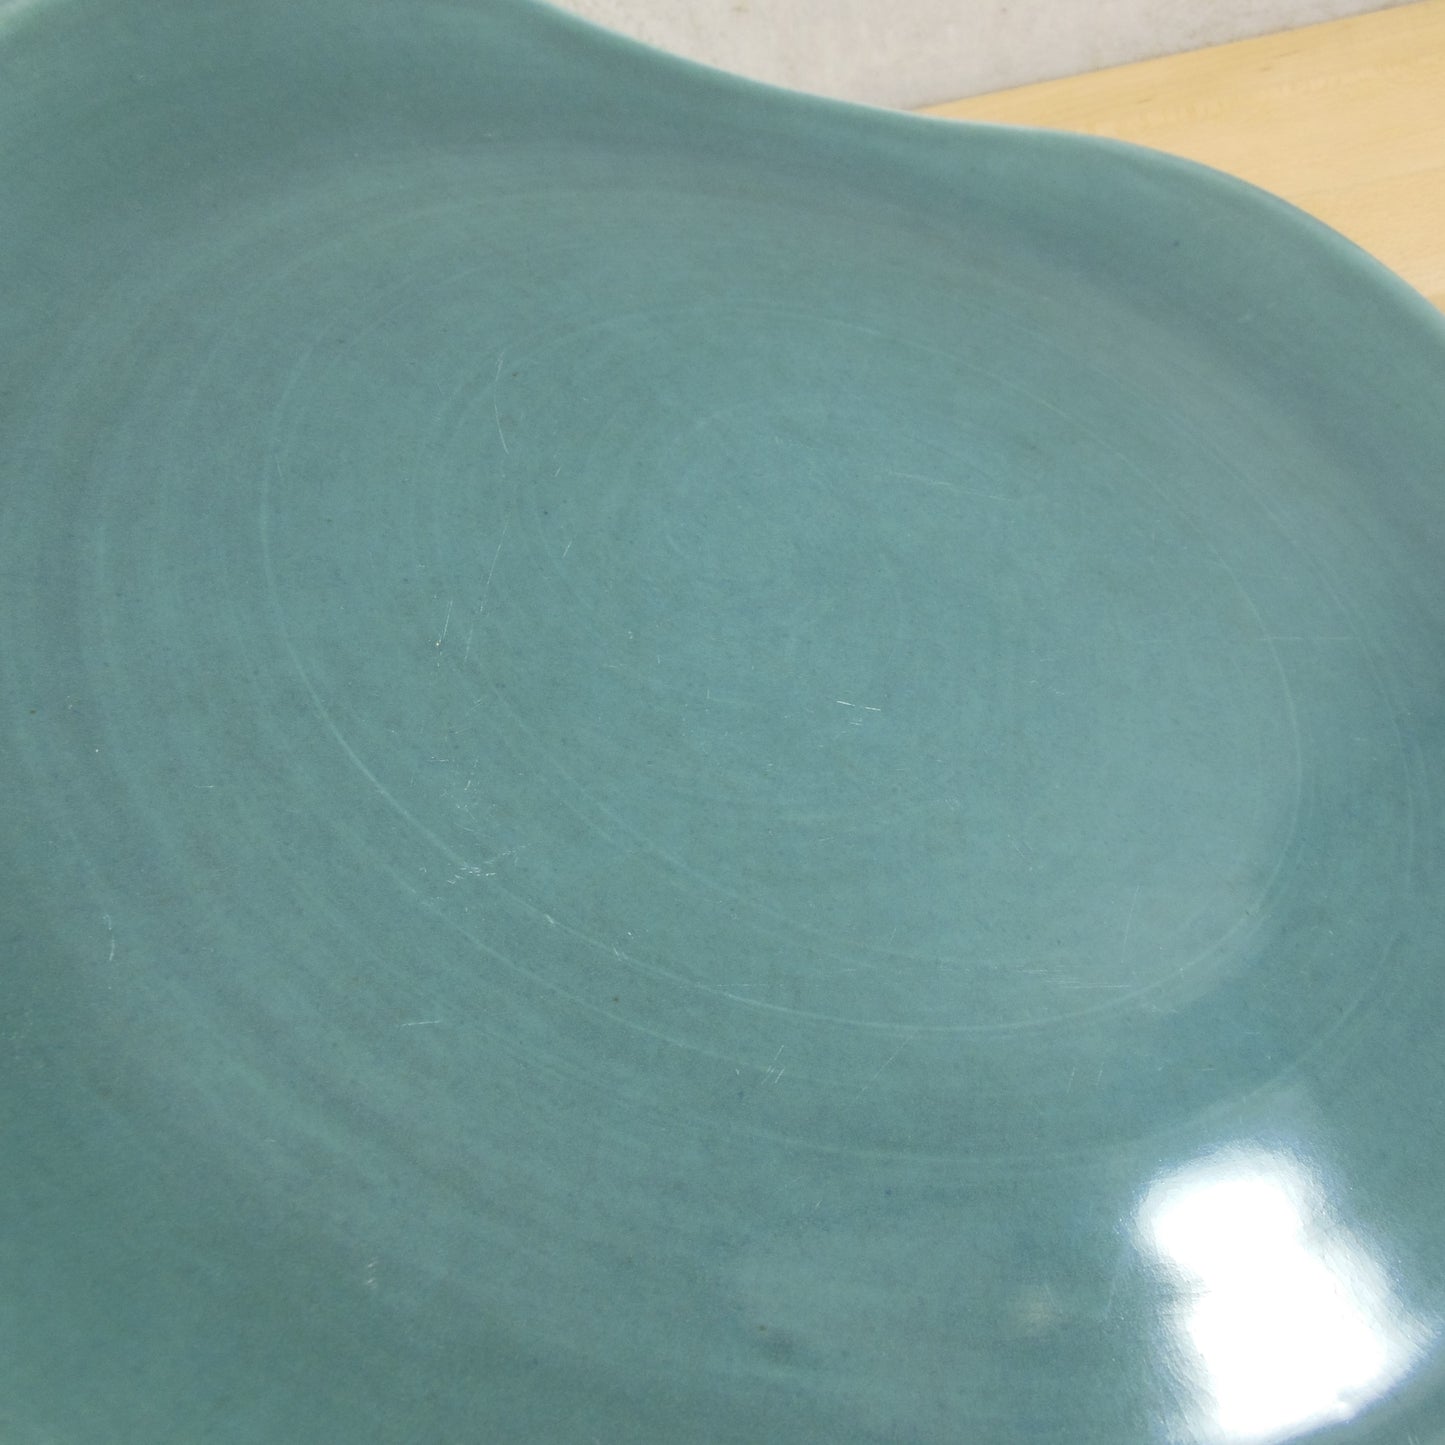 Russel Wright Steubenville - Seafoam Green Chop Plate Serving Platter Tray 13" used